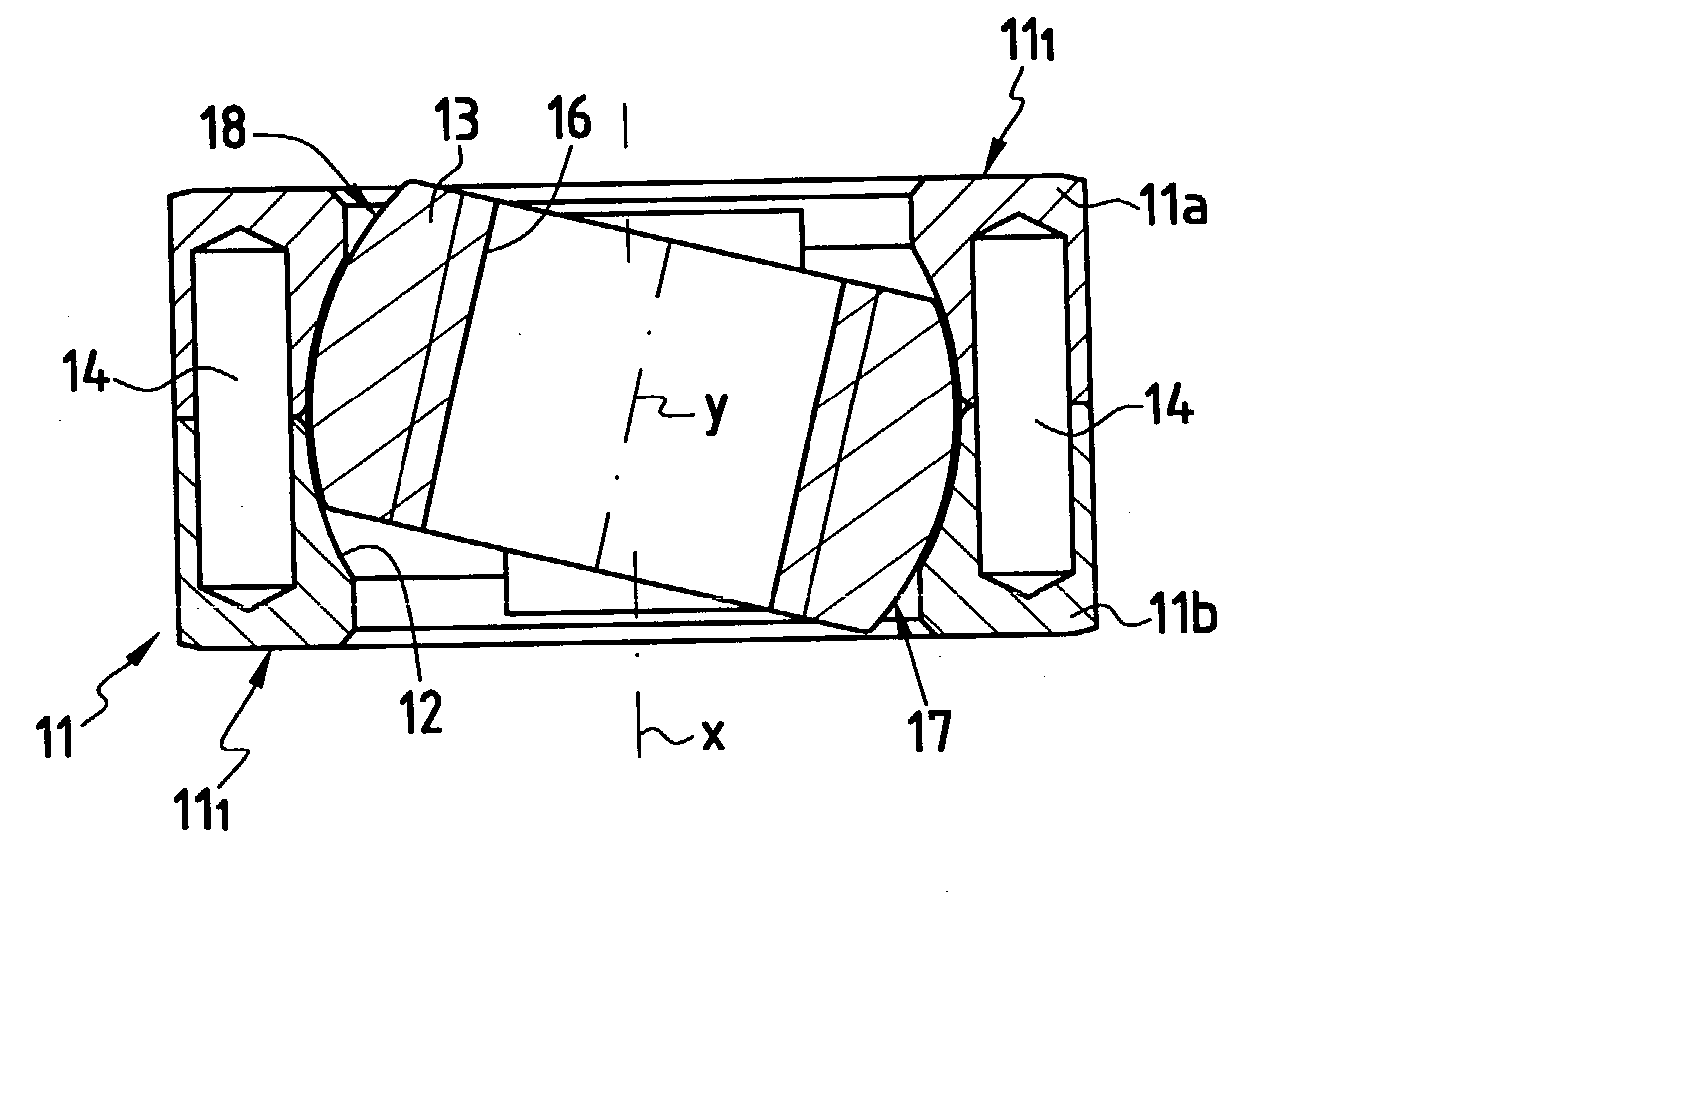 Clamping nut for an osteosynthesis device